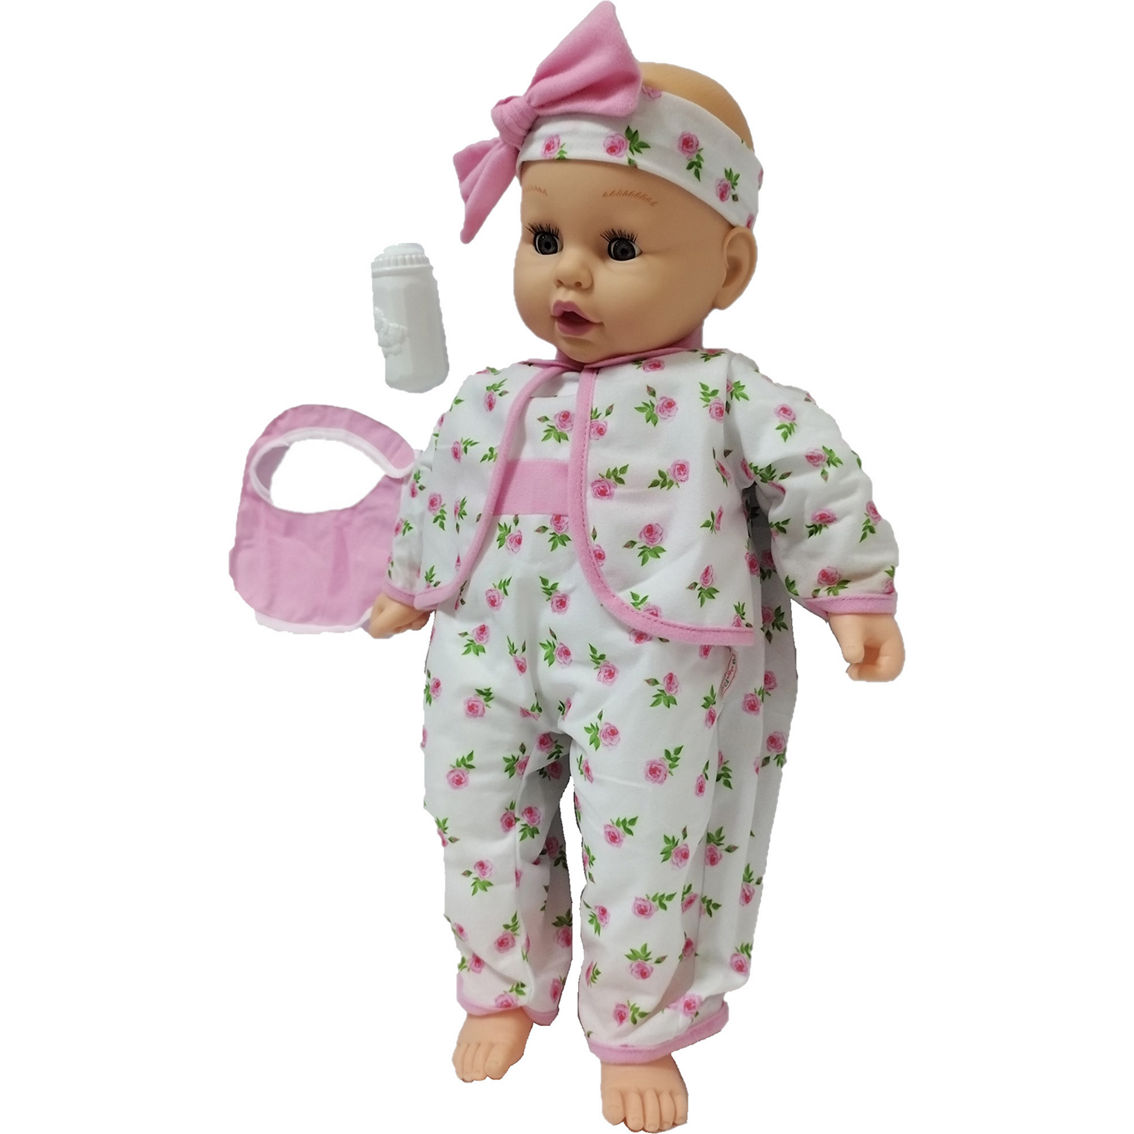 Baby's First So Big Baby 19 in. Doll with White 2 pc Pajama - Image 4 of 4